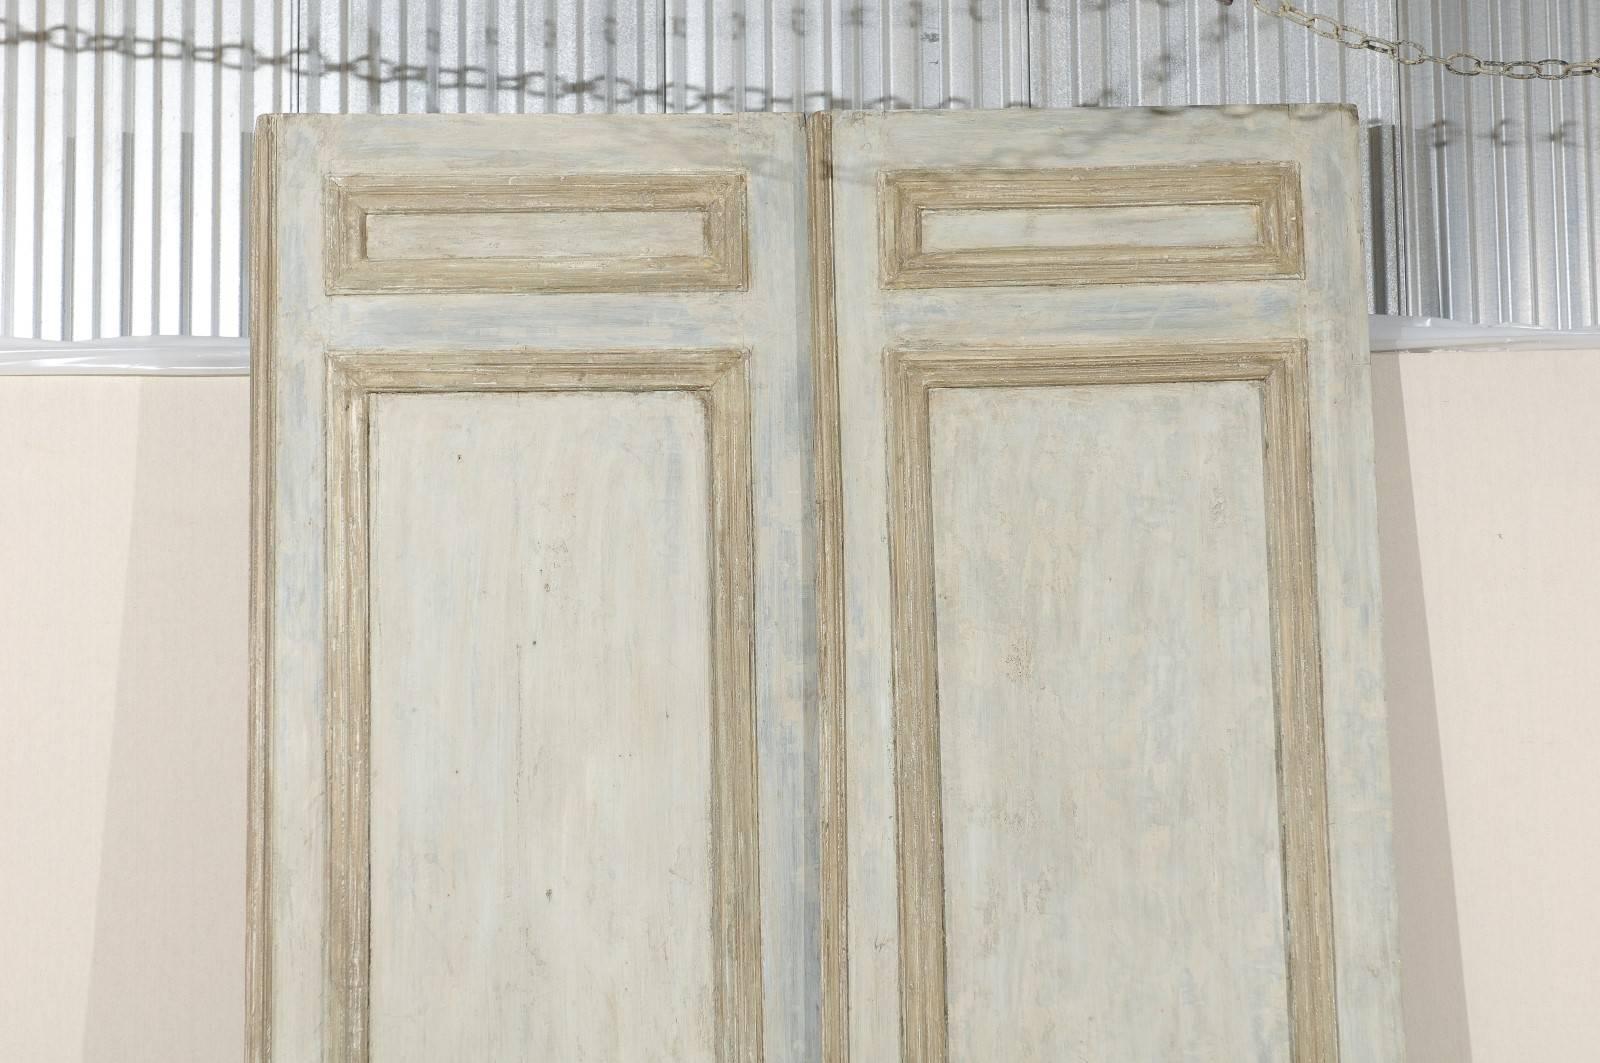 Painted Set of French Green-Grey, Bi-Folding Doors from the 19th Century